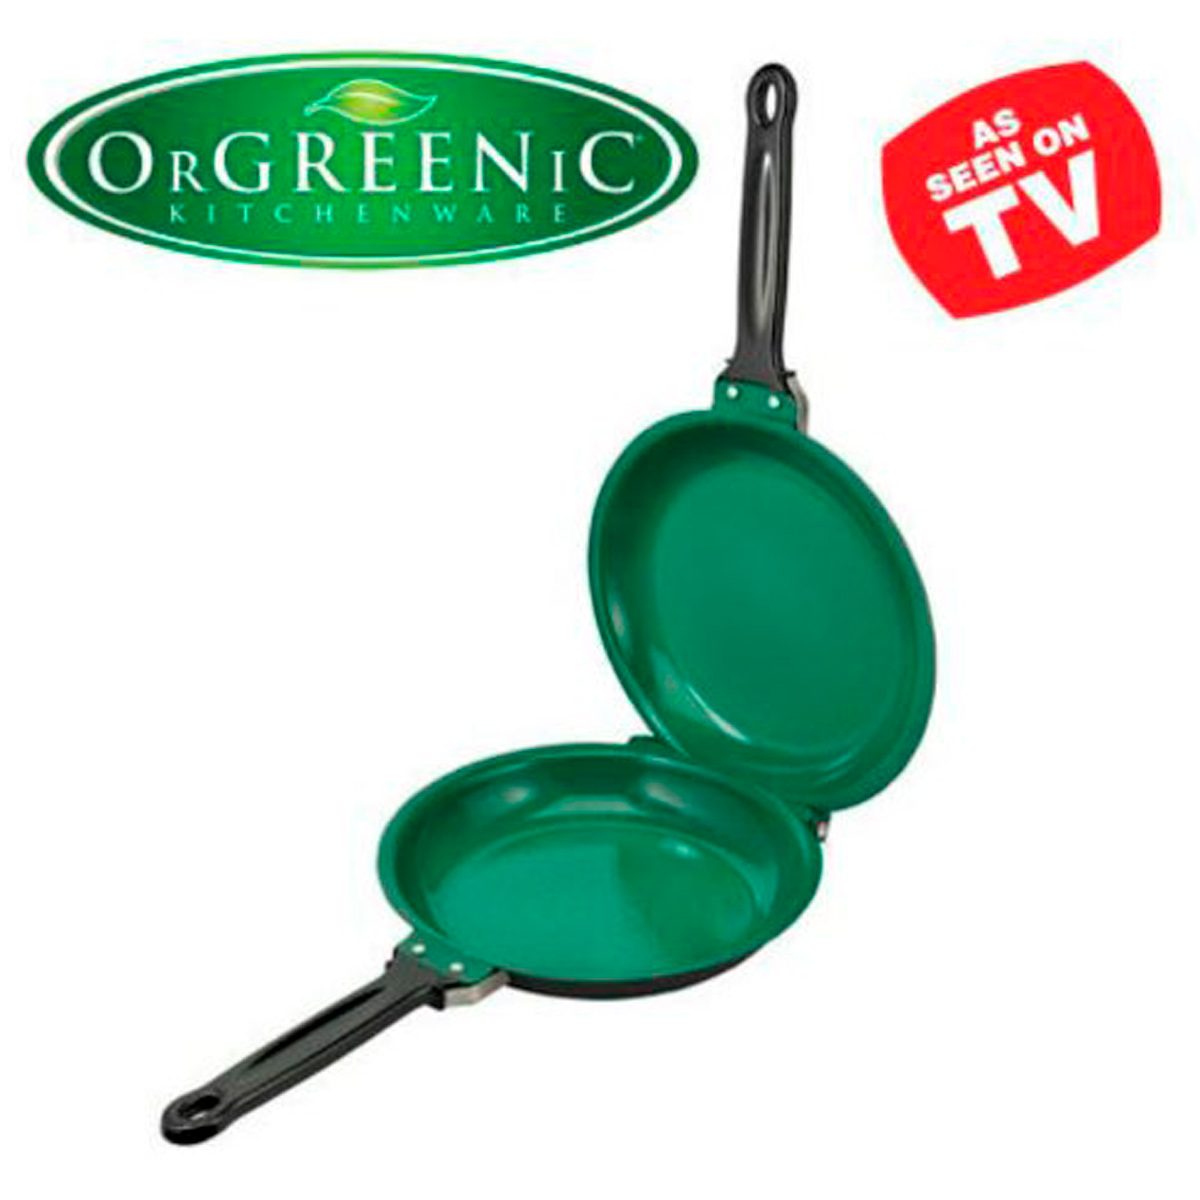 OrGREENic Ceramic Green Non-Stick Frying Pan, Cook Without Oil or Butter, 10  Fry Pan, As Seen on TV 